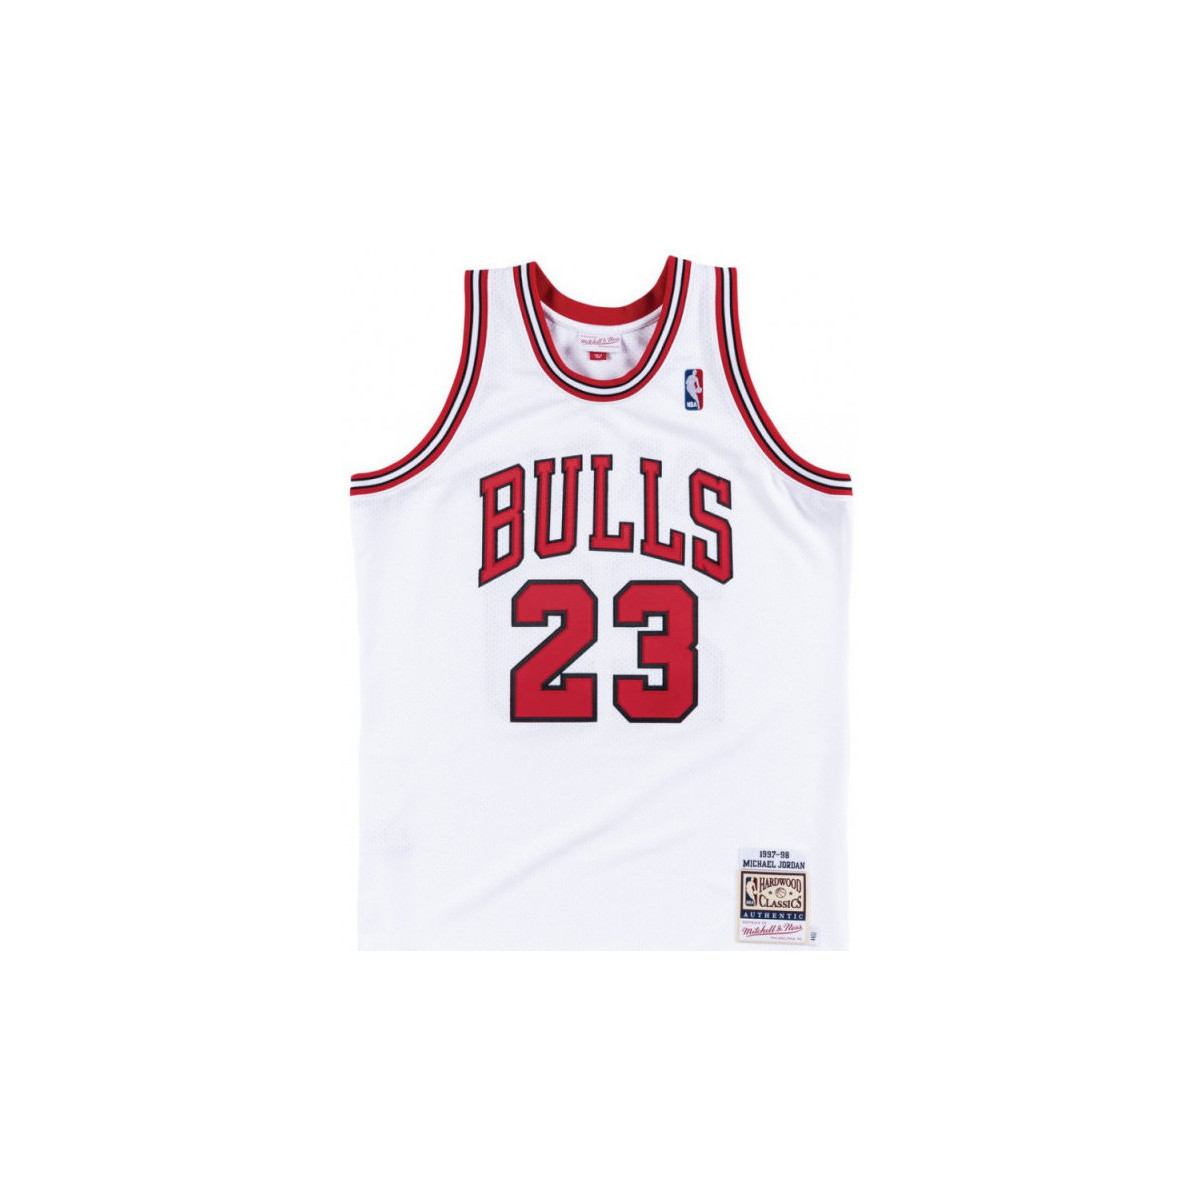 Vêtements T-shirts manches courtes Mitchell And Ness Maillot NBA Authentique Michae Multicolore